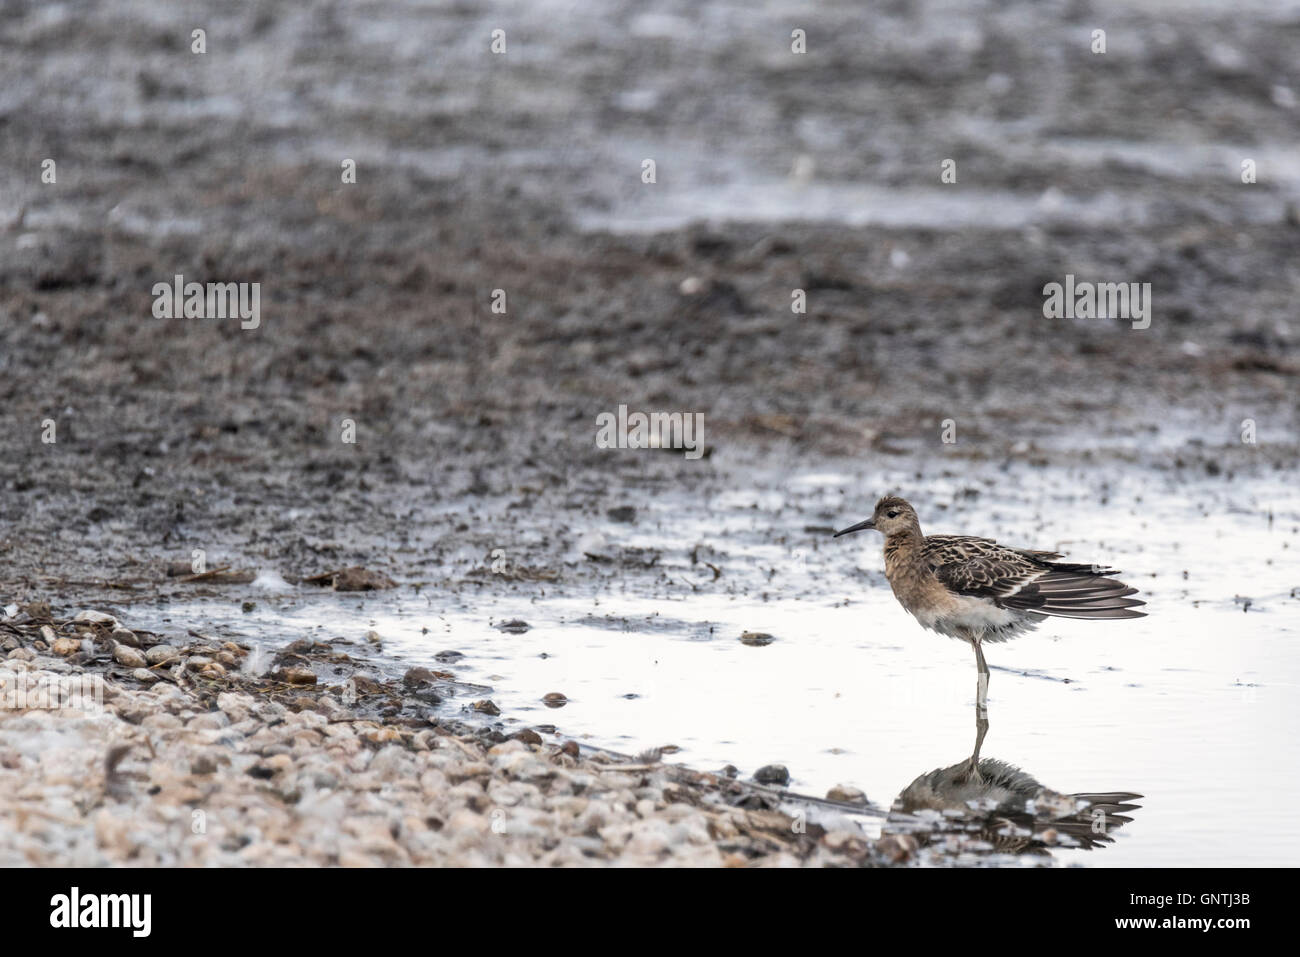 A Ruff standing in water with mud flats behind.  An example of the 'rule of thirds' compositional concept Stock Photo